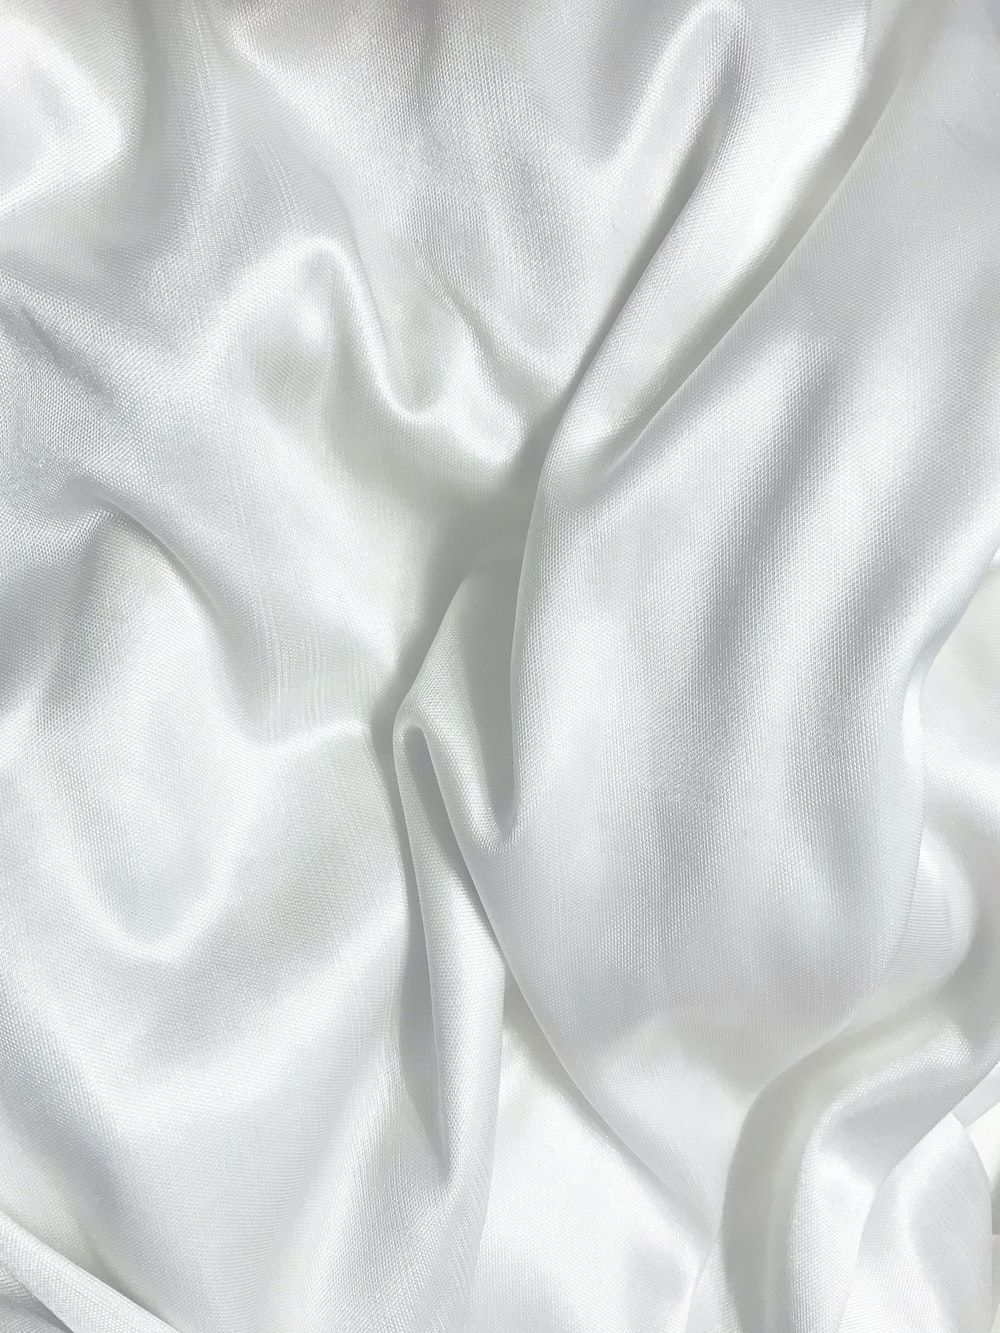 A white silk fabric with a wrinkled texture - Silk